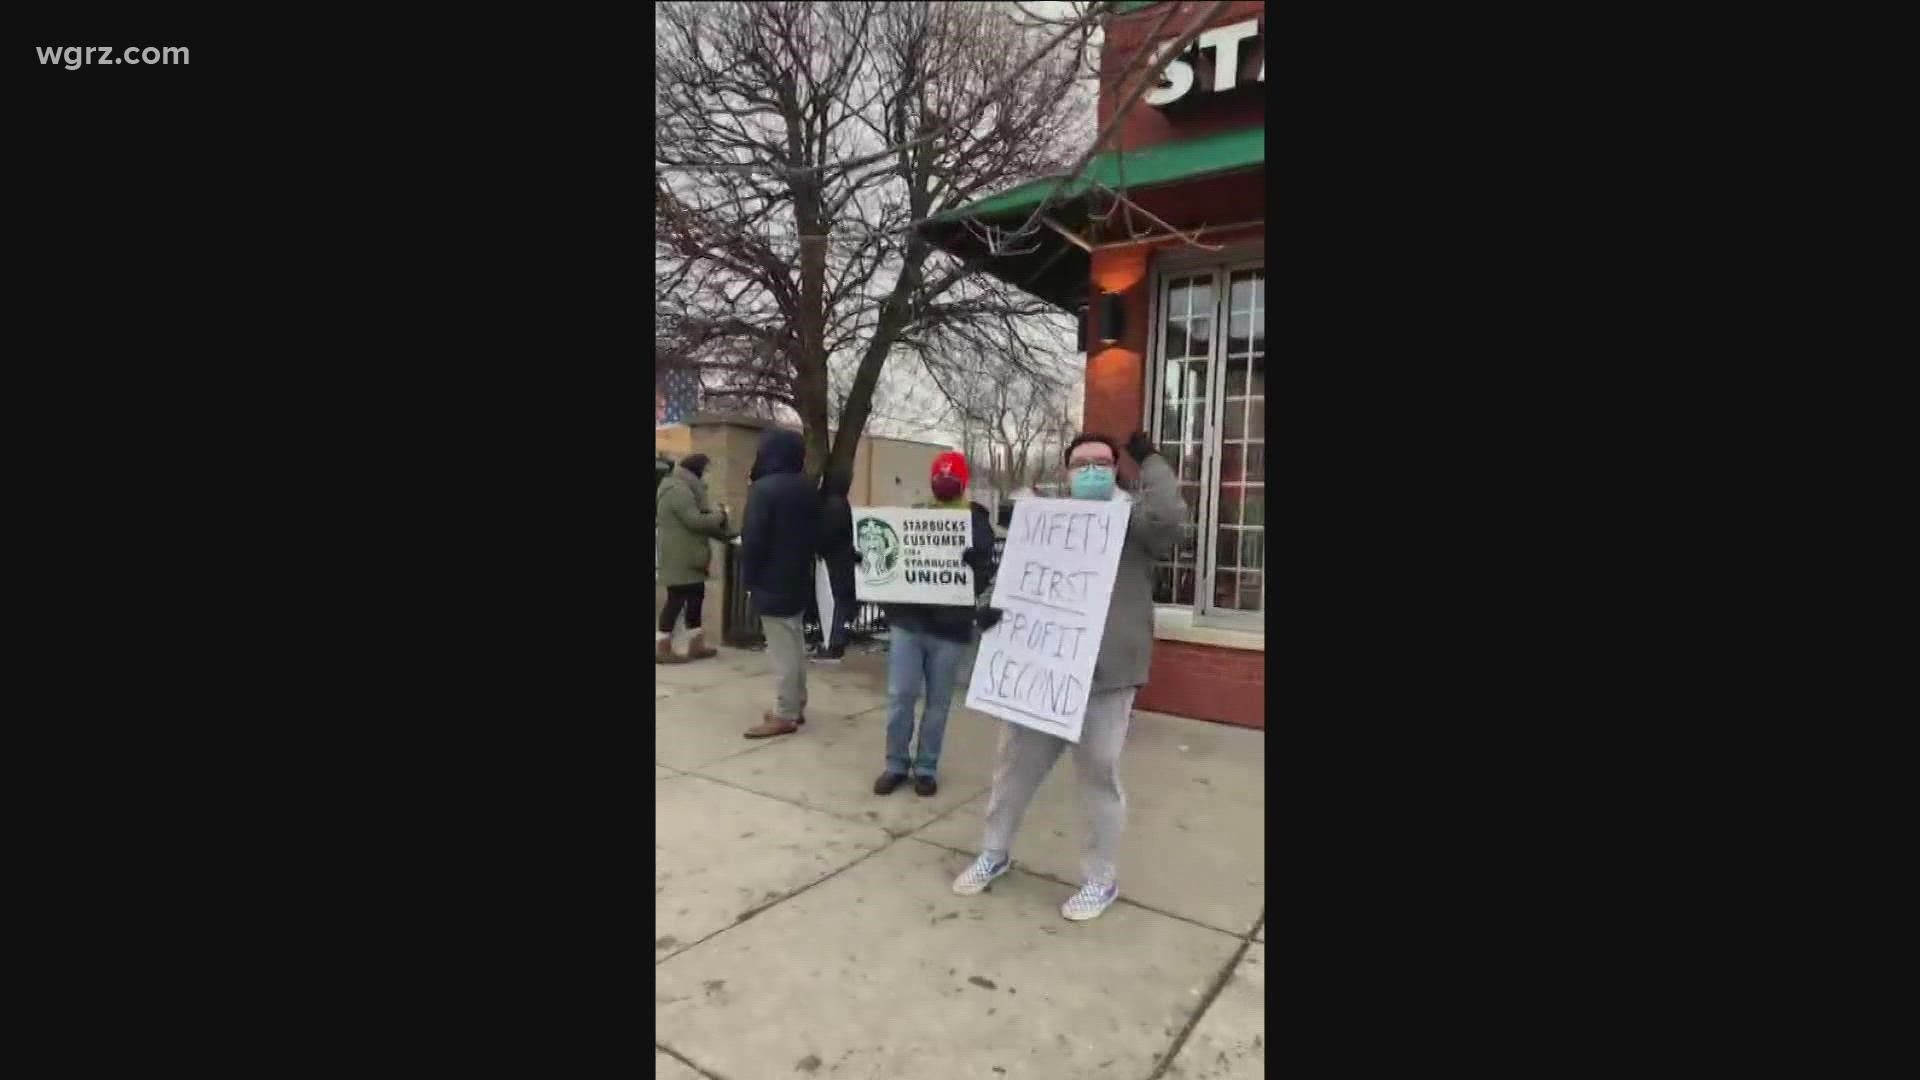 Starbucks Elmwood workers walk off the job this morning over Covid concerns